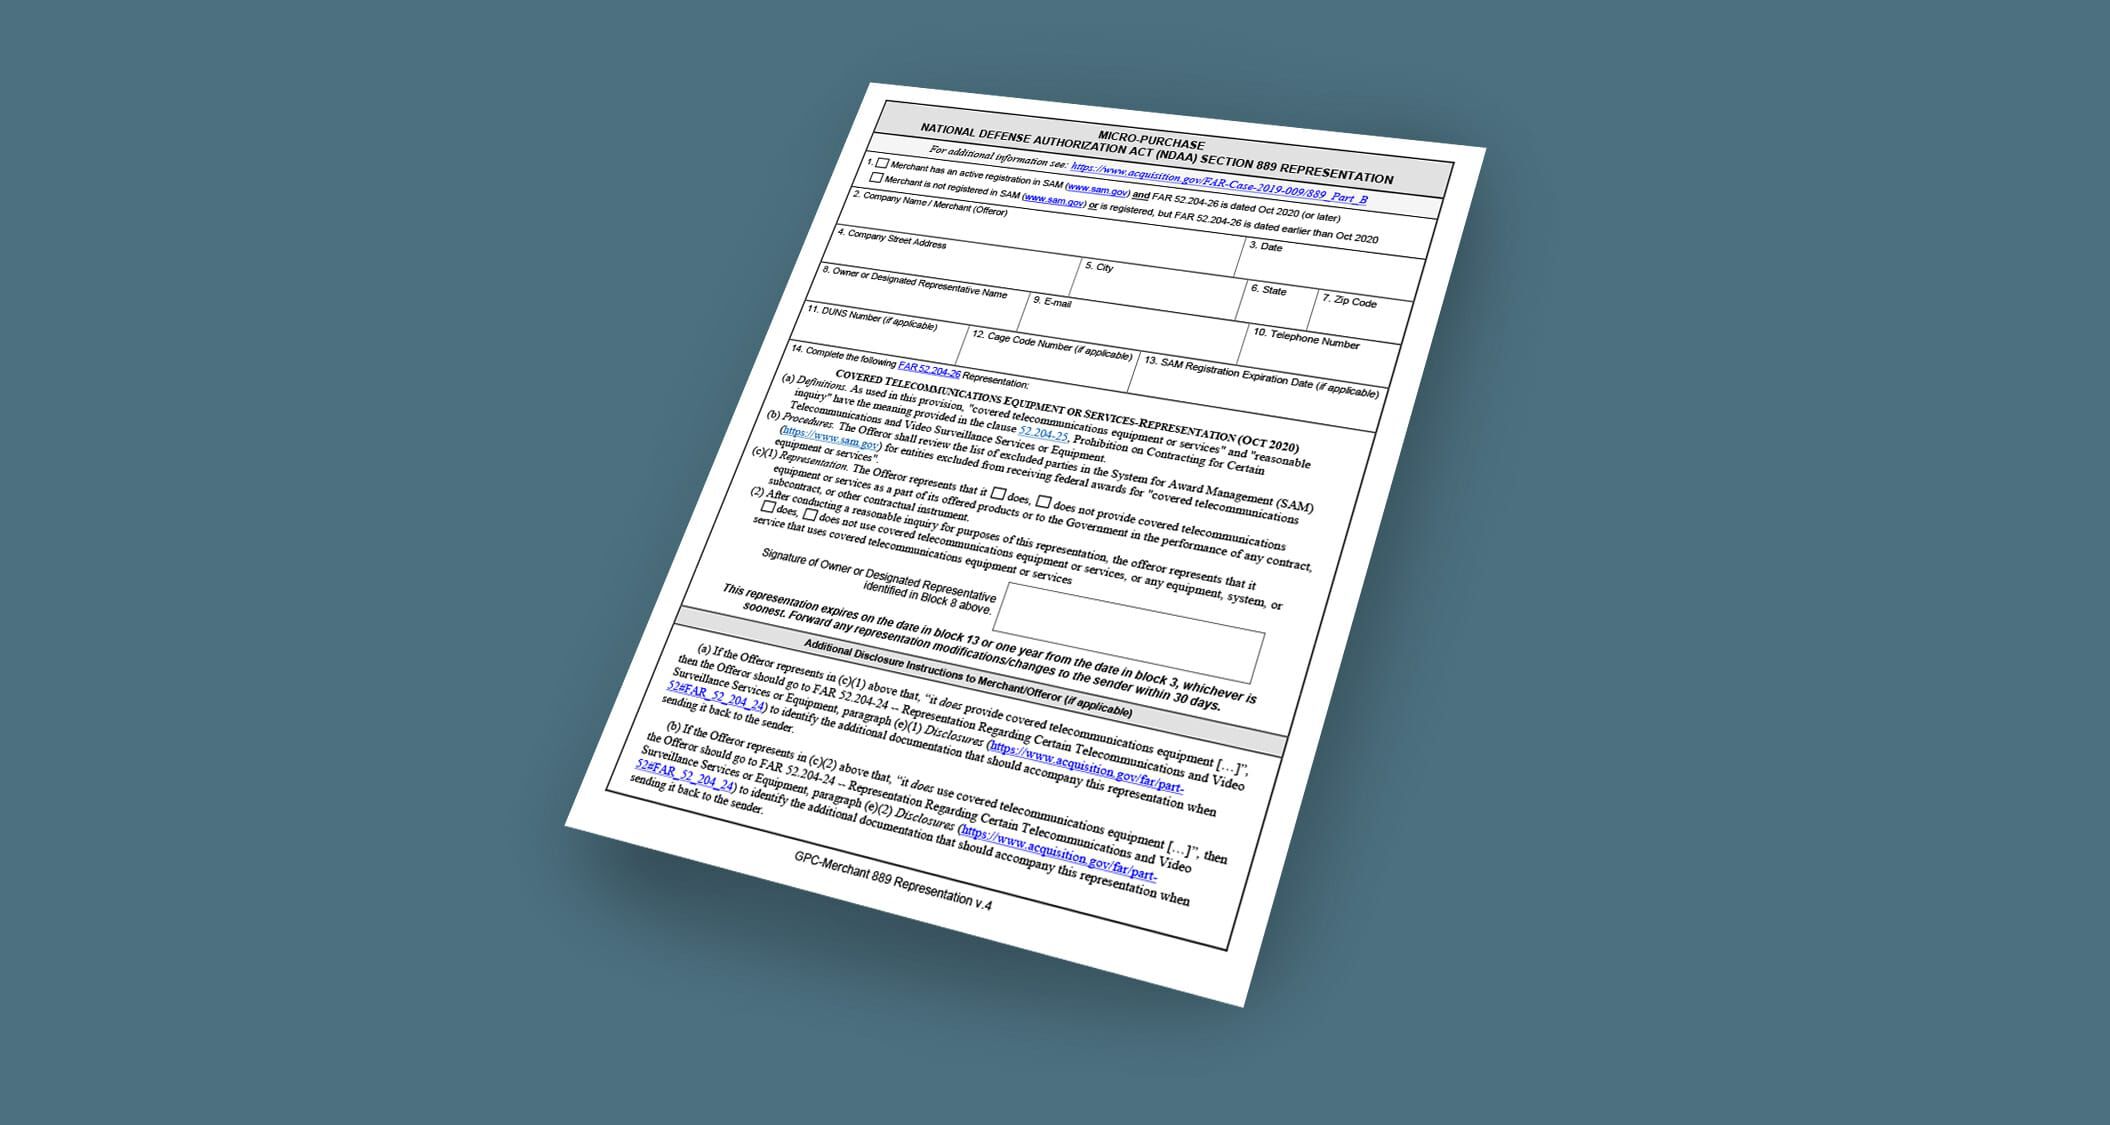 section 889 form on blue background